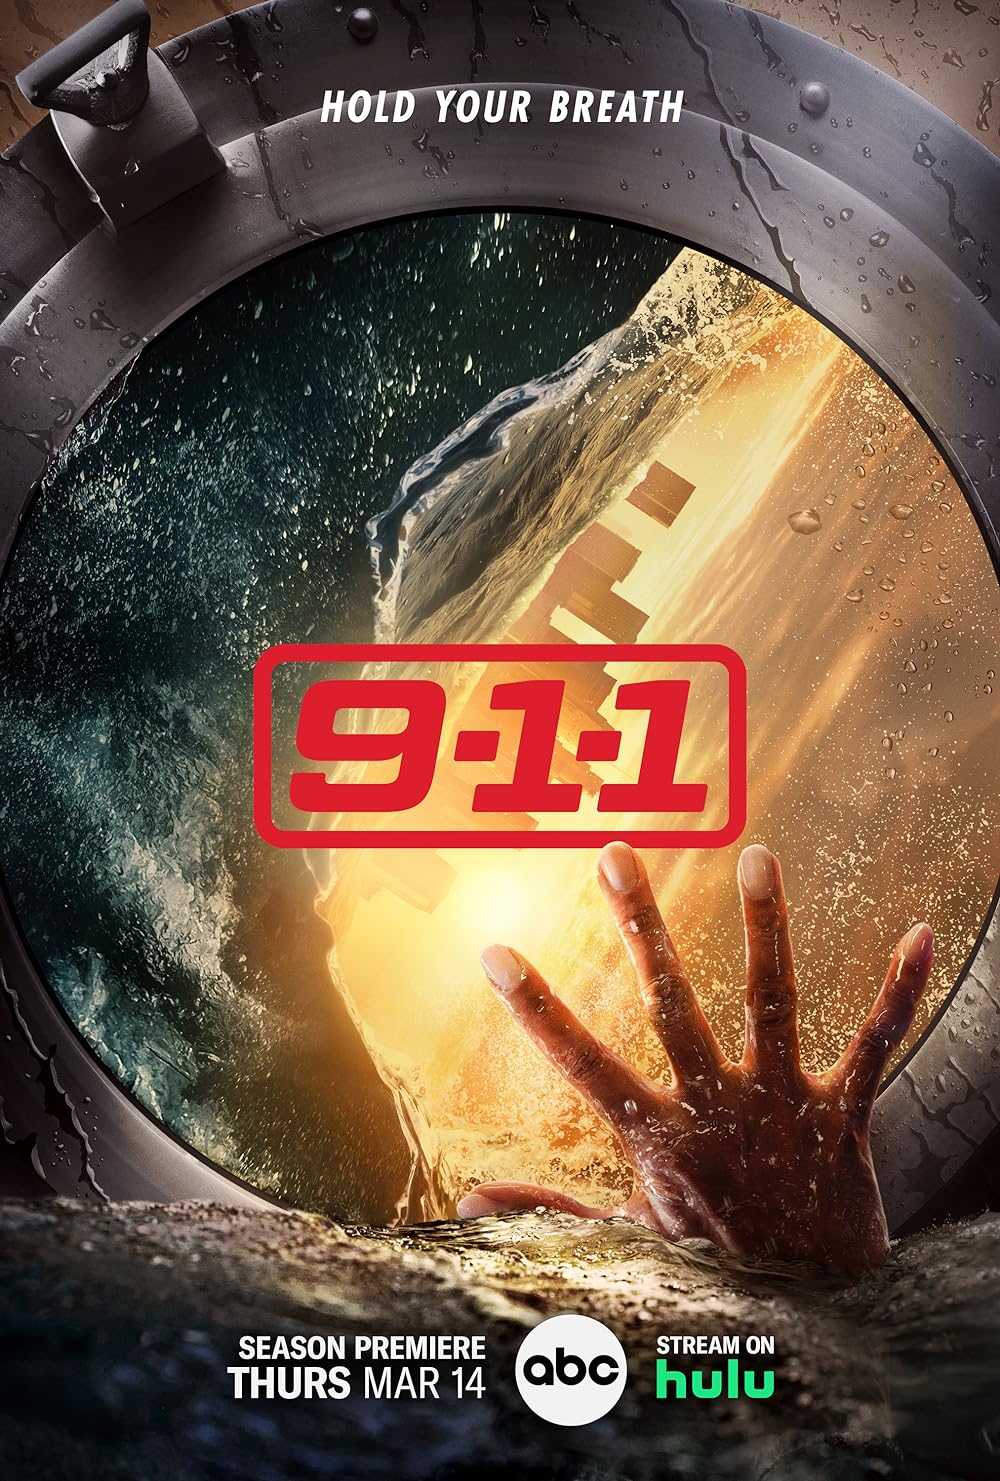 New Episode: 9-1-1 Season 7 Episode 6 (S07E06) - There Goes the Groom